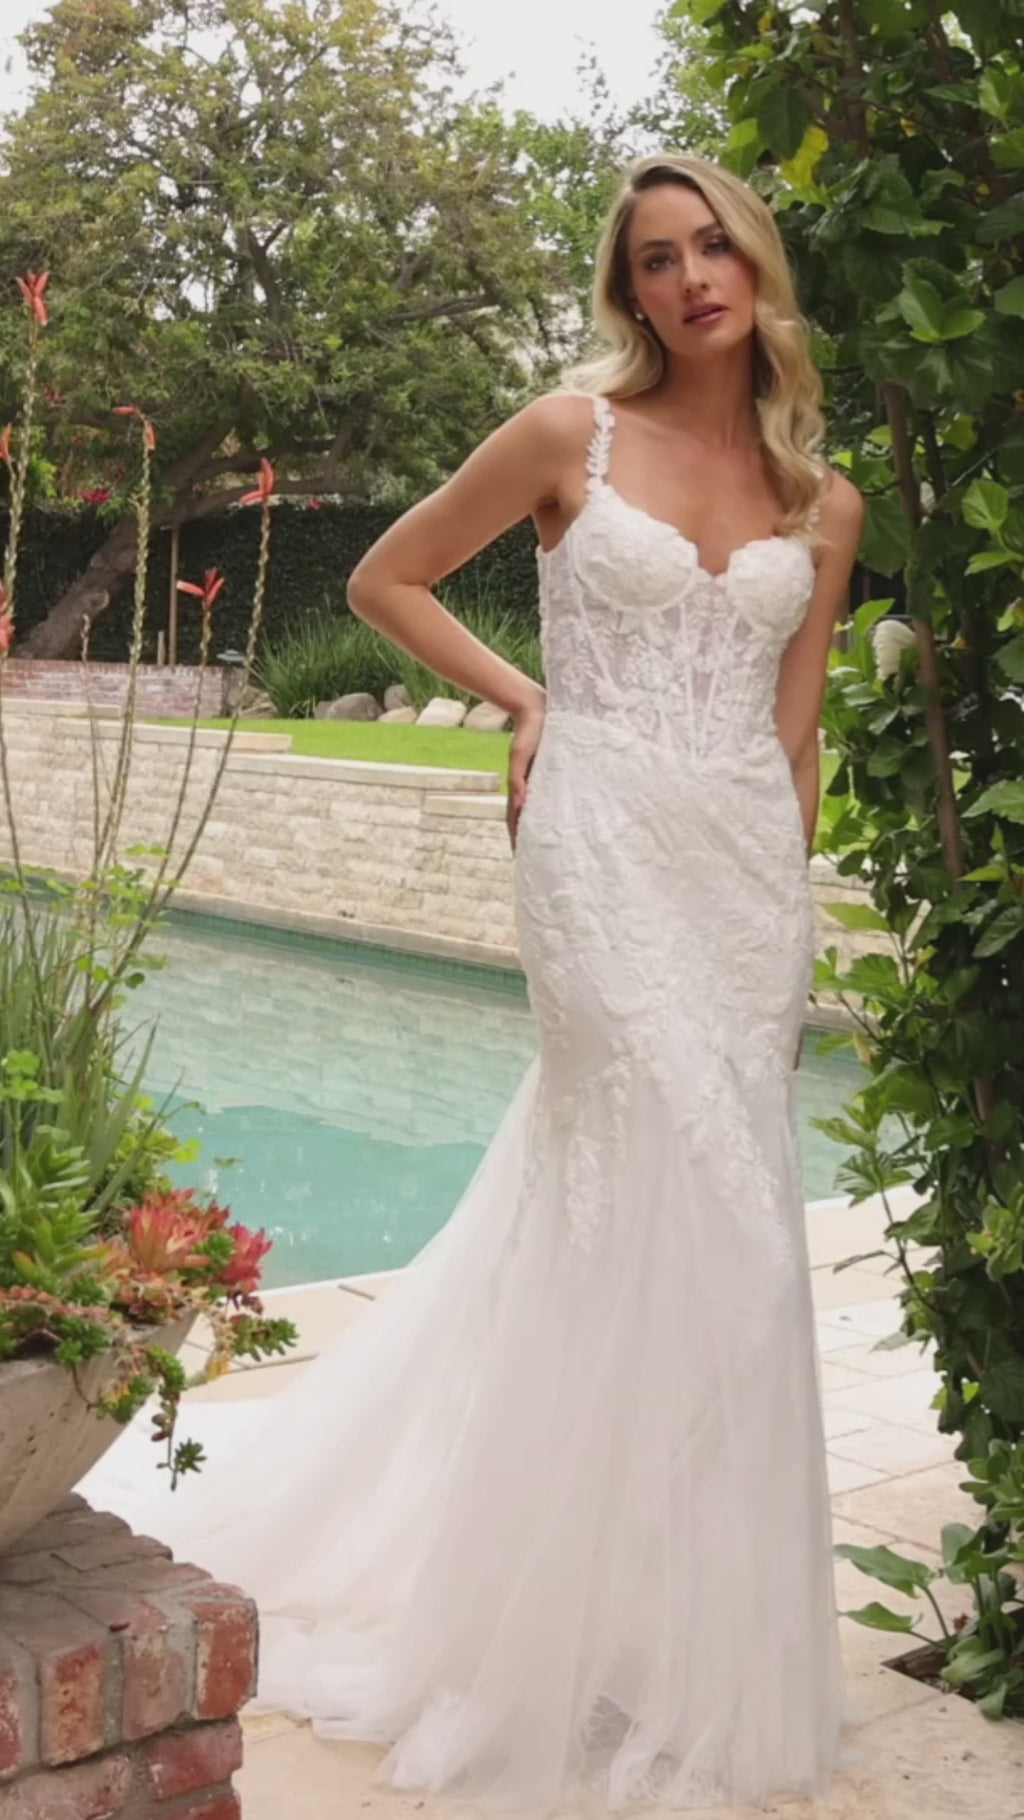 Lace Applique Mermaid Wedding Dress by Ladivine CDS432W 16 / Off White